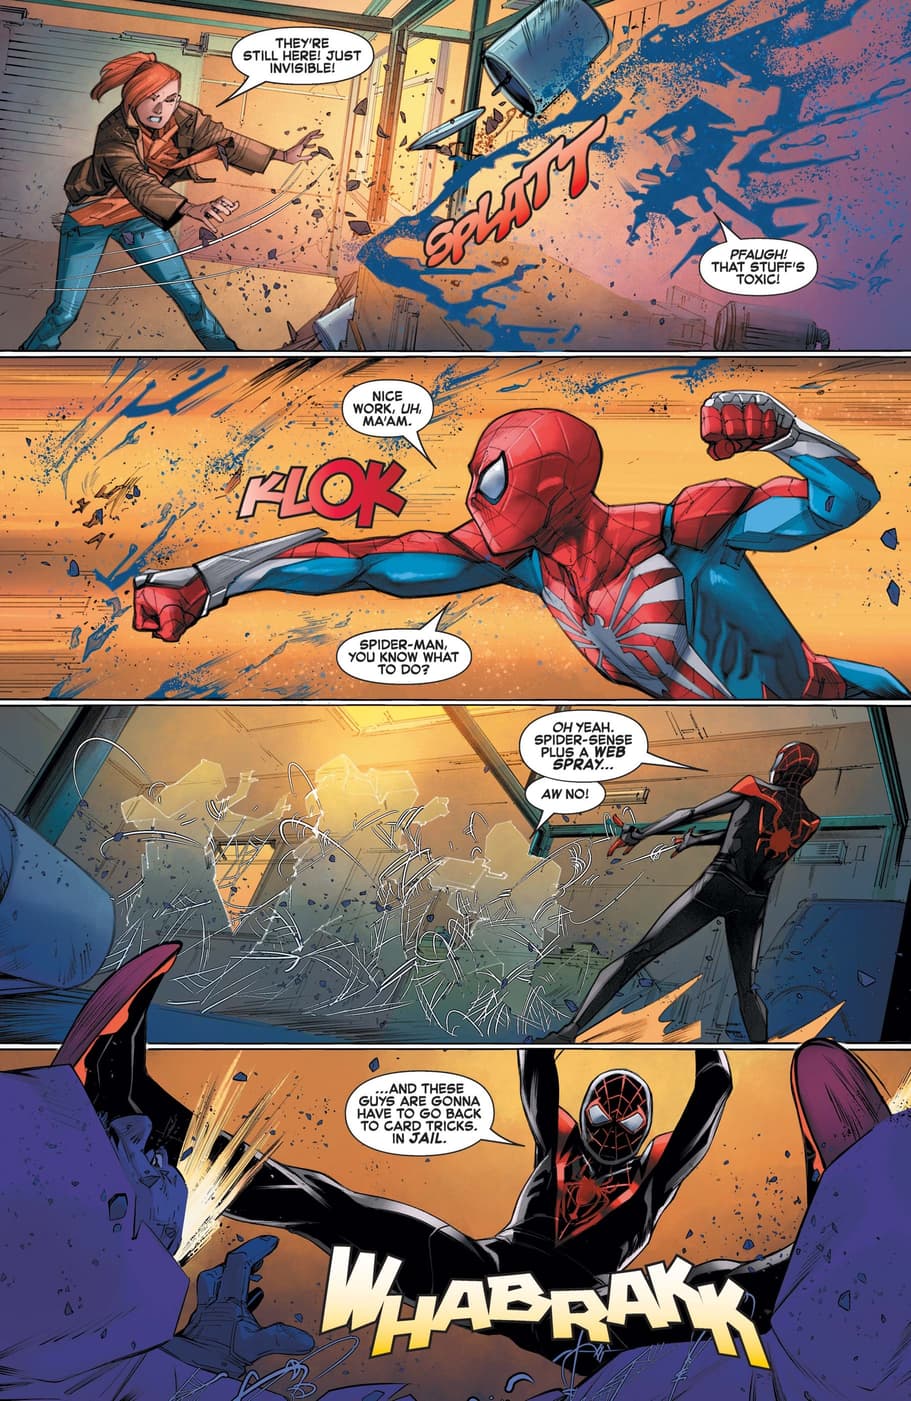 Preview from MARVEL’S SPIDER-MAN 2 (2023) #1 by Christos Gage, Ig Guara, and Rachelle Rosenberg.